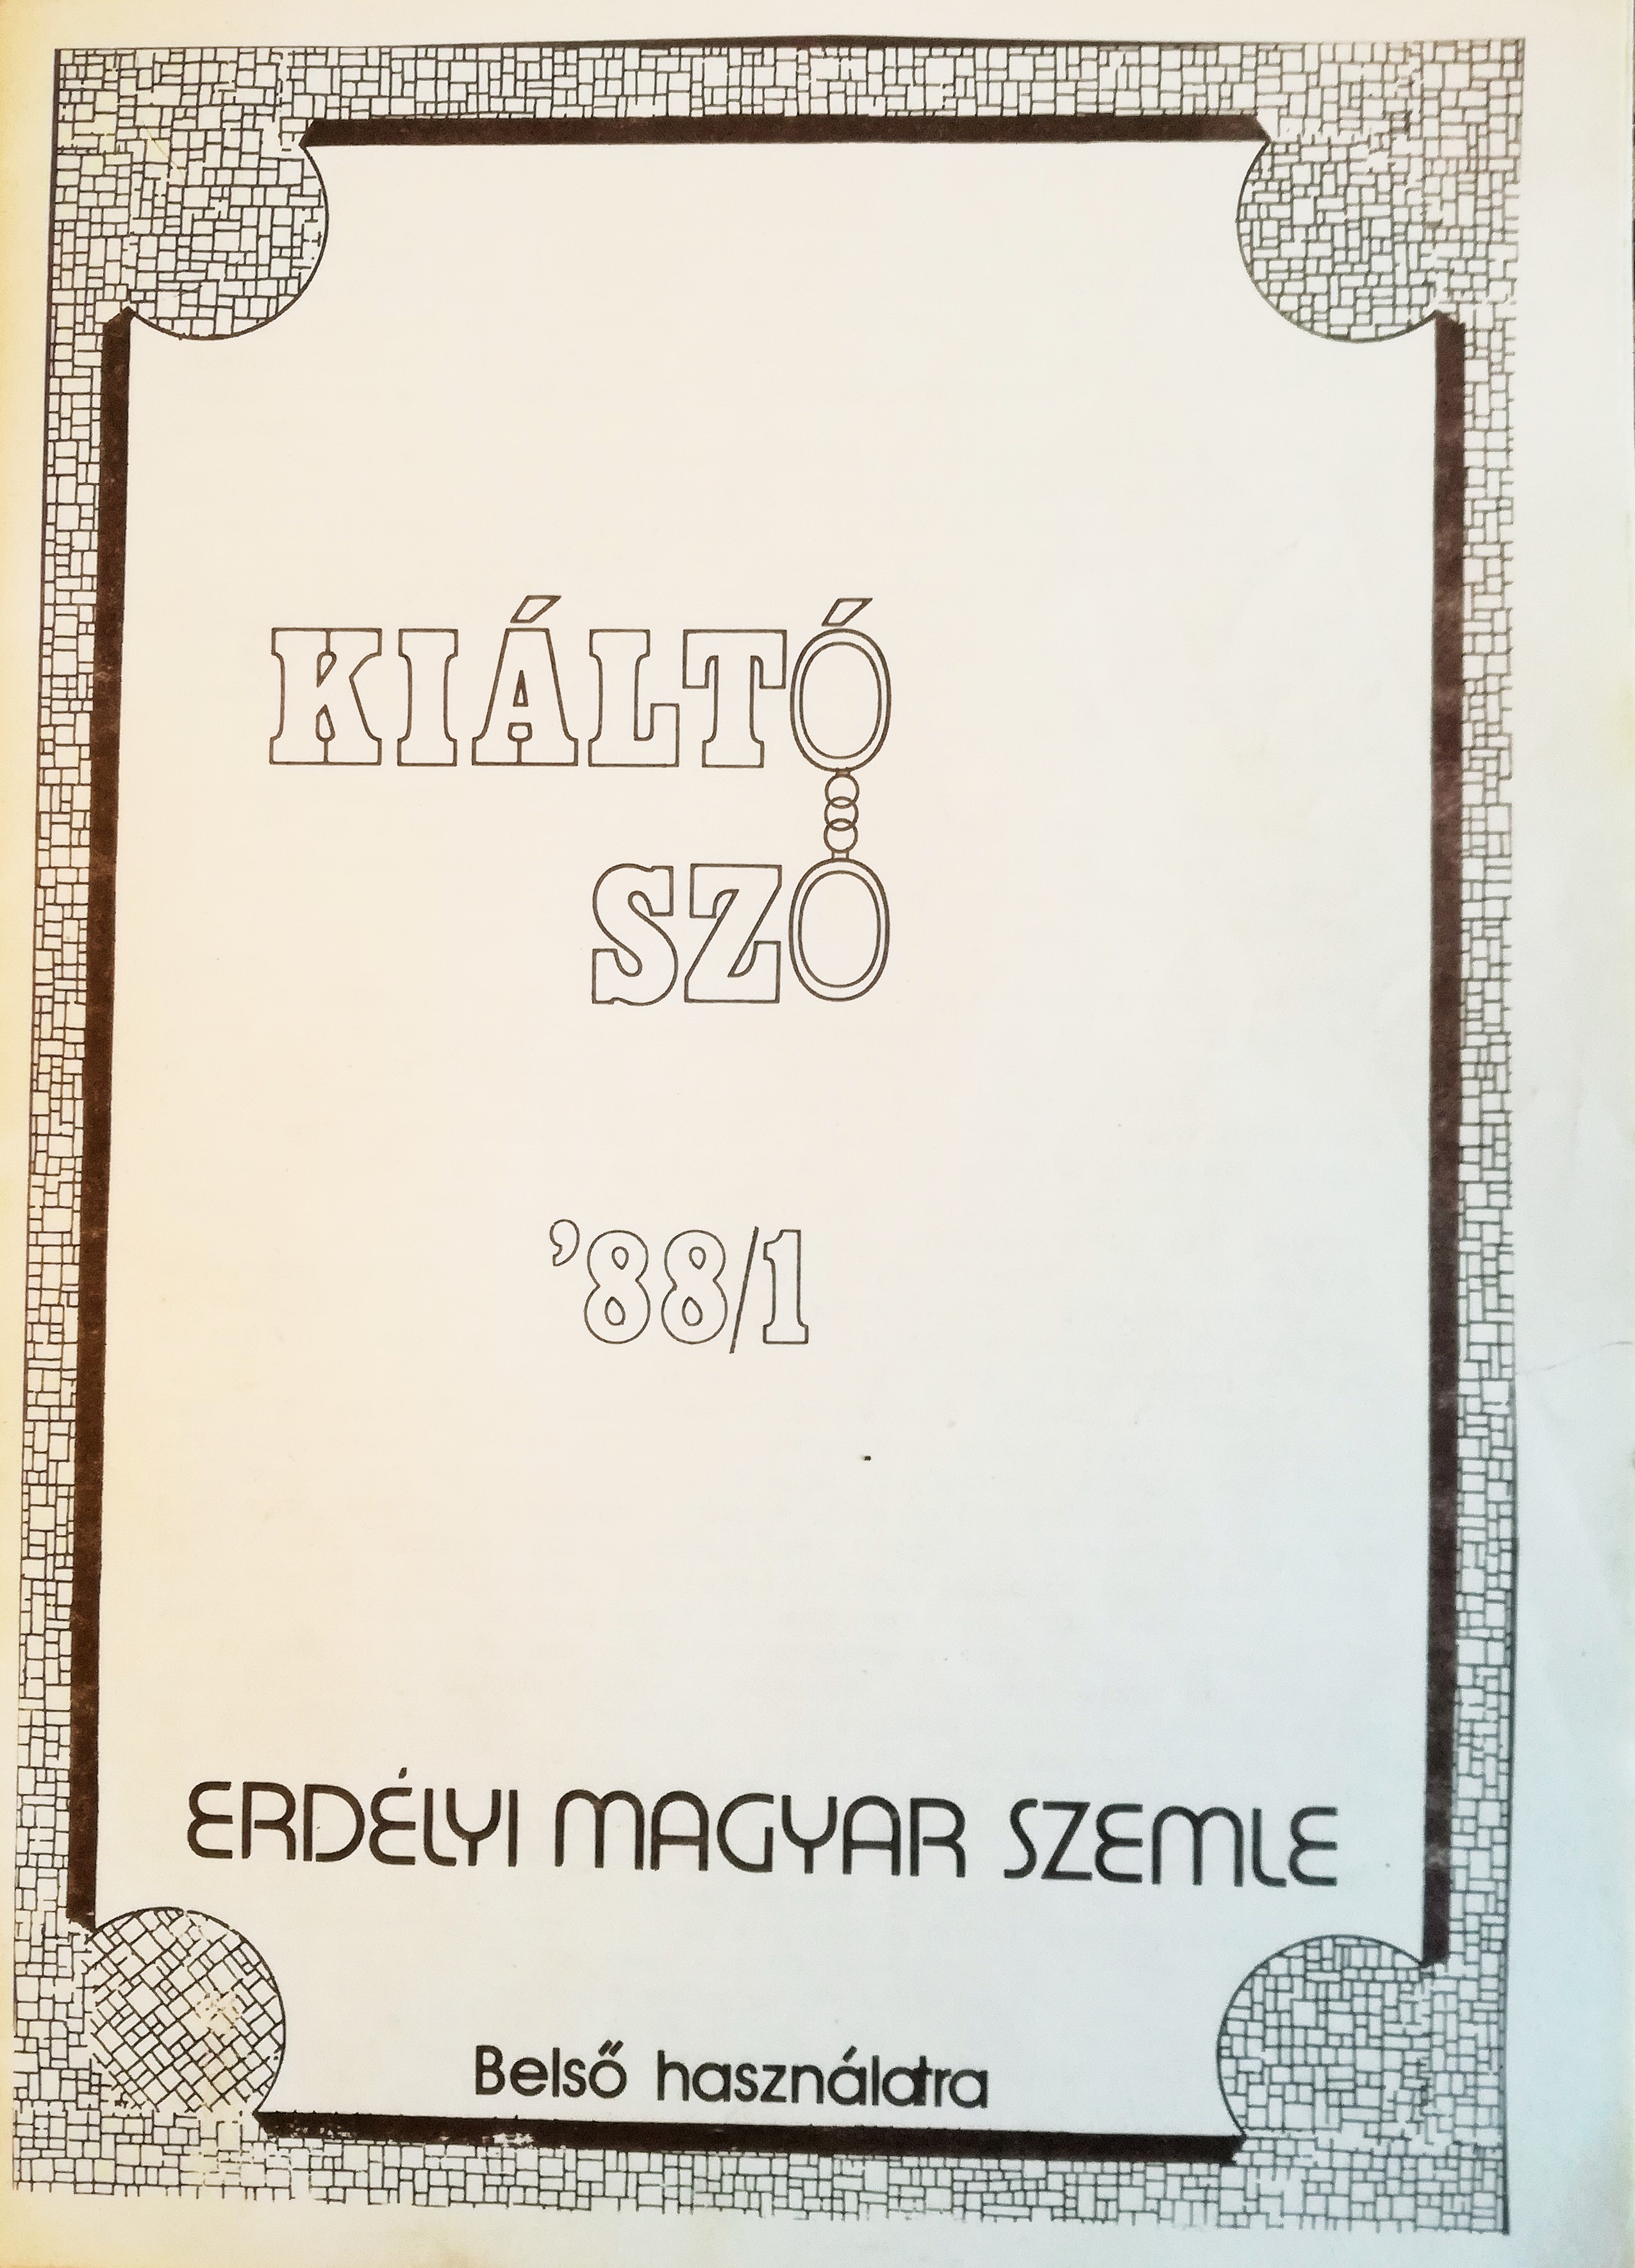 Front cover of the first issue of the Kiáltó Szó samizdat publication